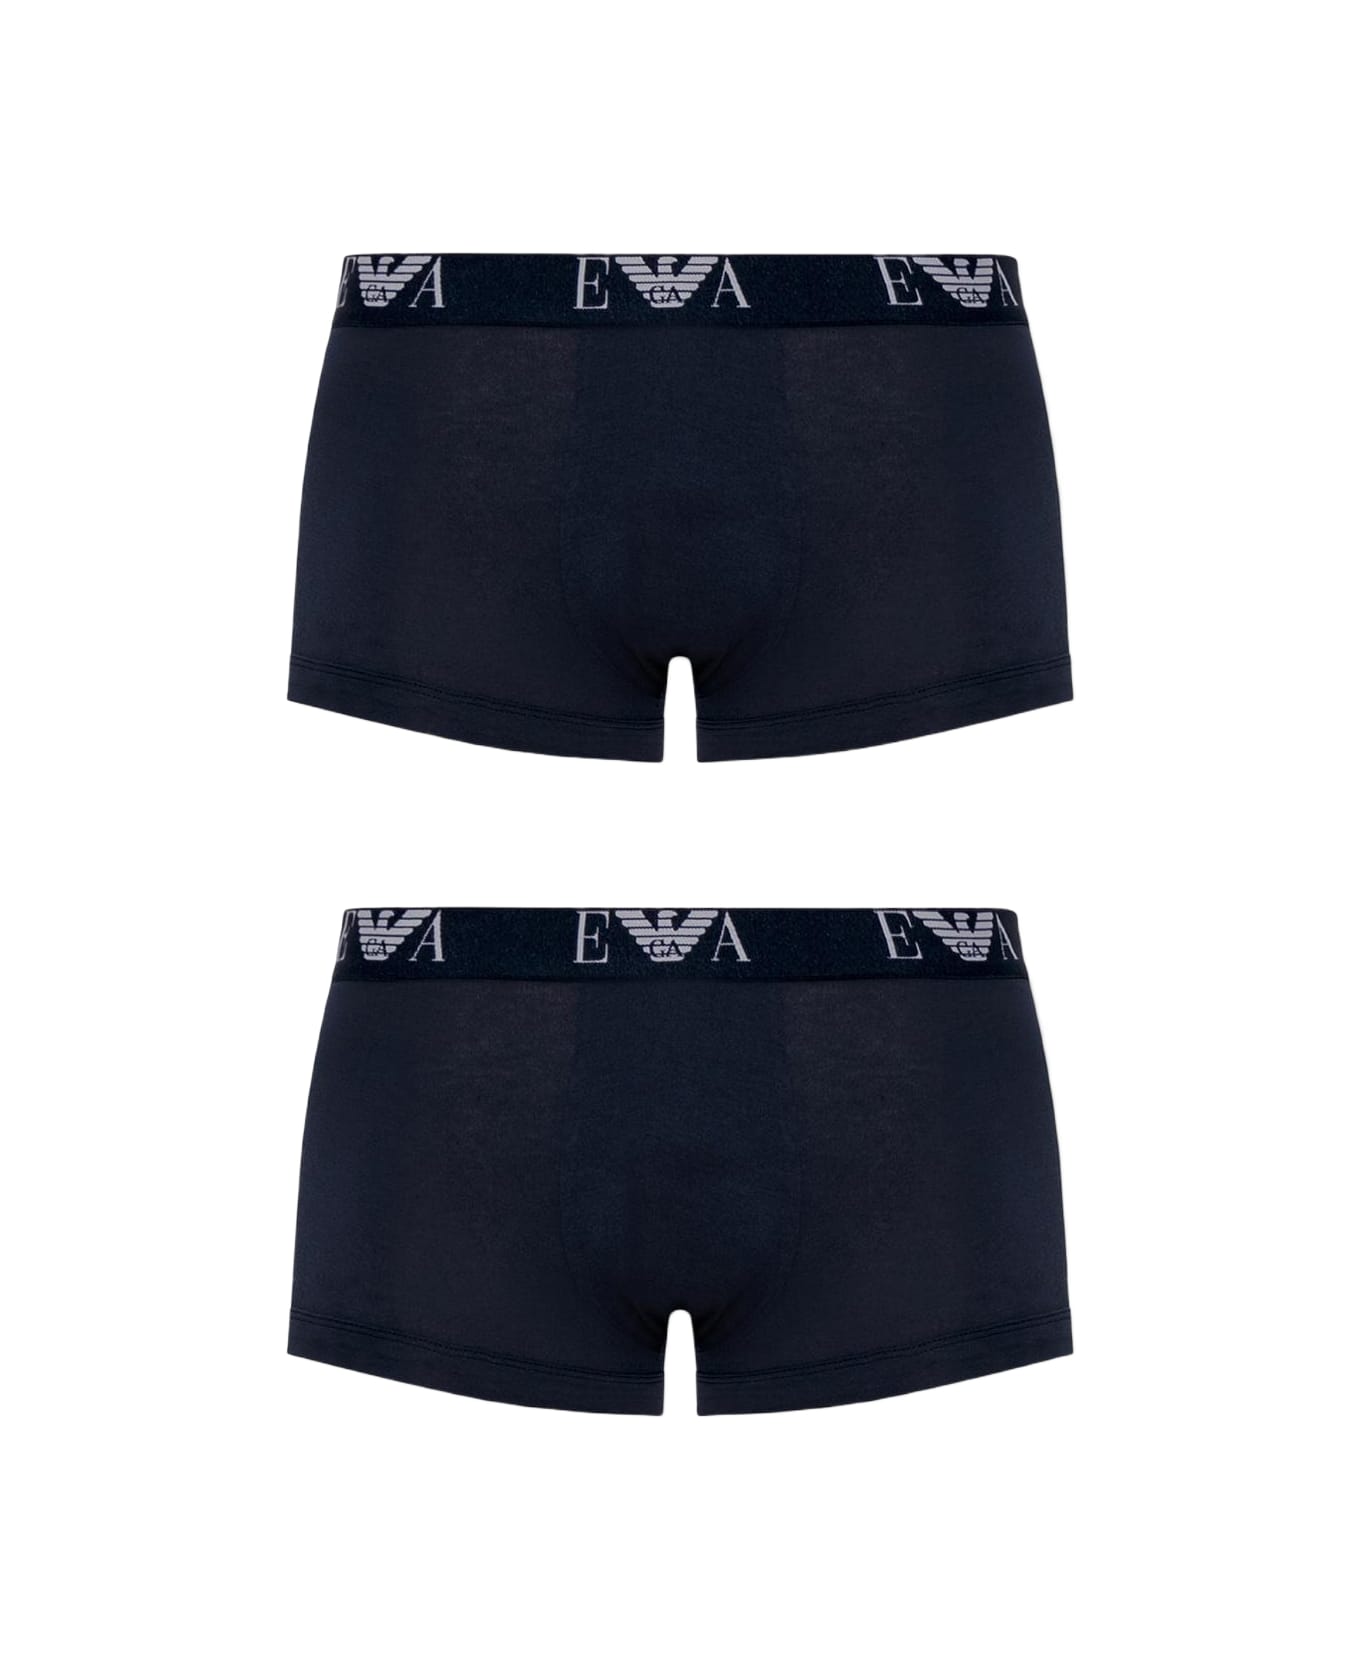 Emporio Armani Branded Boxers Two-pack - Blue ショーツ